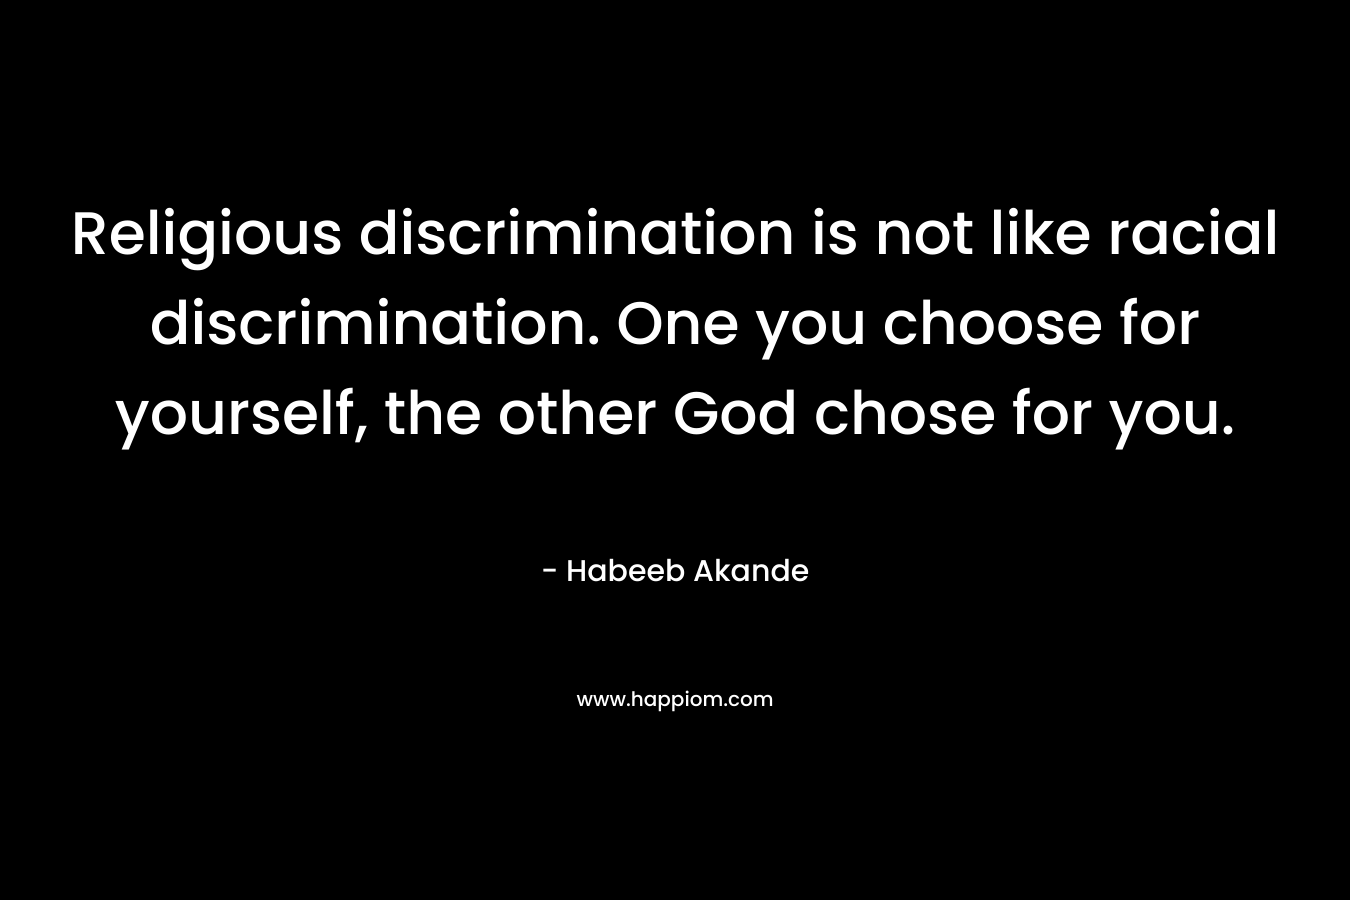 Religious discrimination is not like racial discrimination. One you choose for yourself, the other God chose for you. – Habeeb Akande